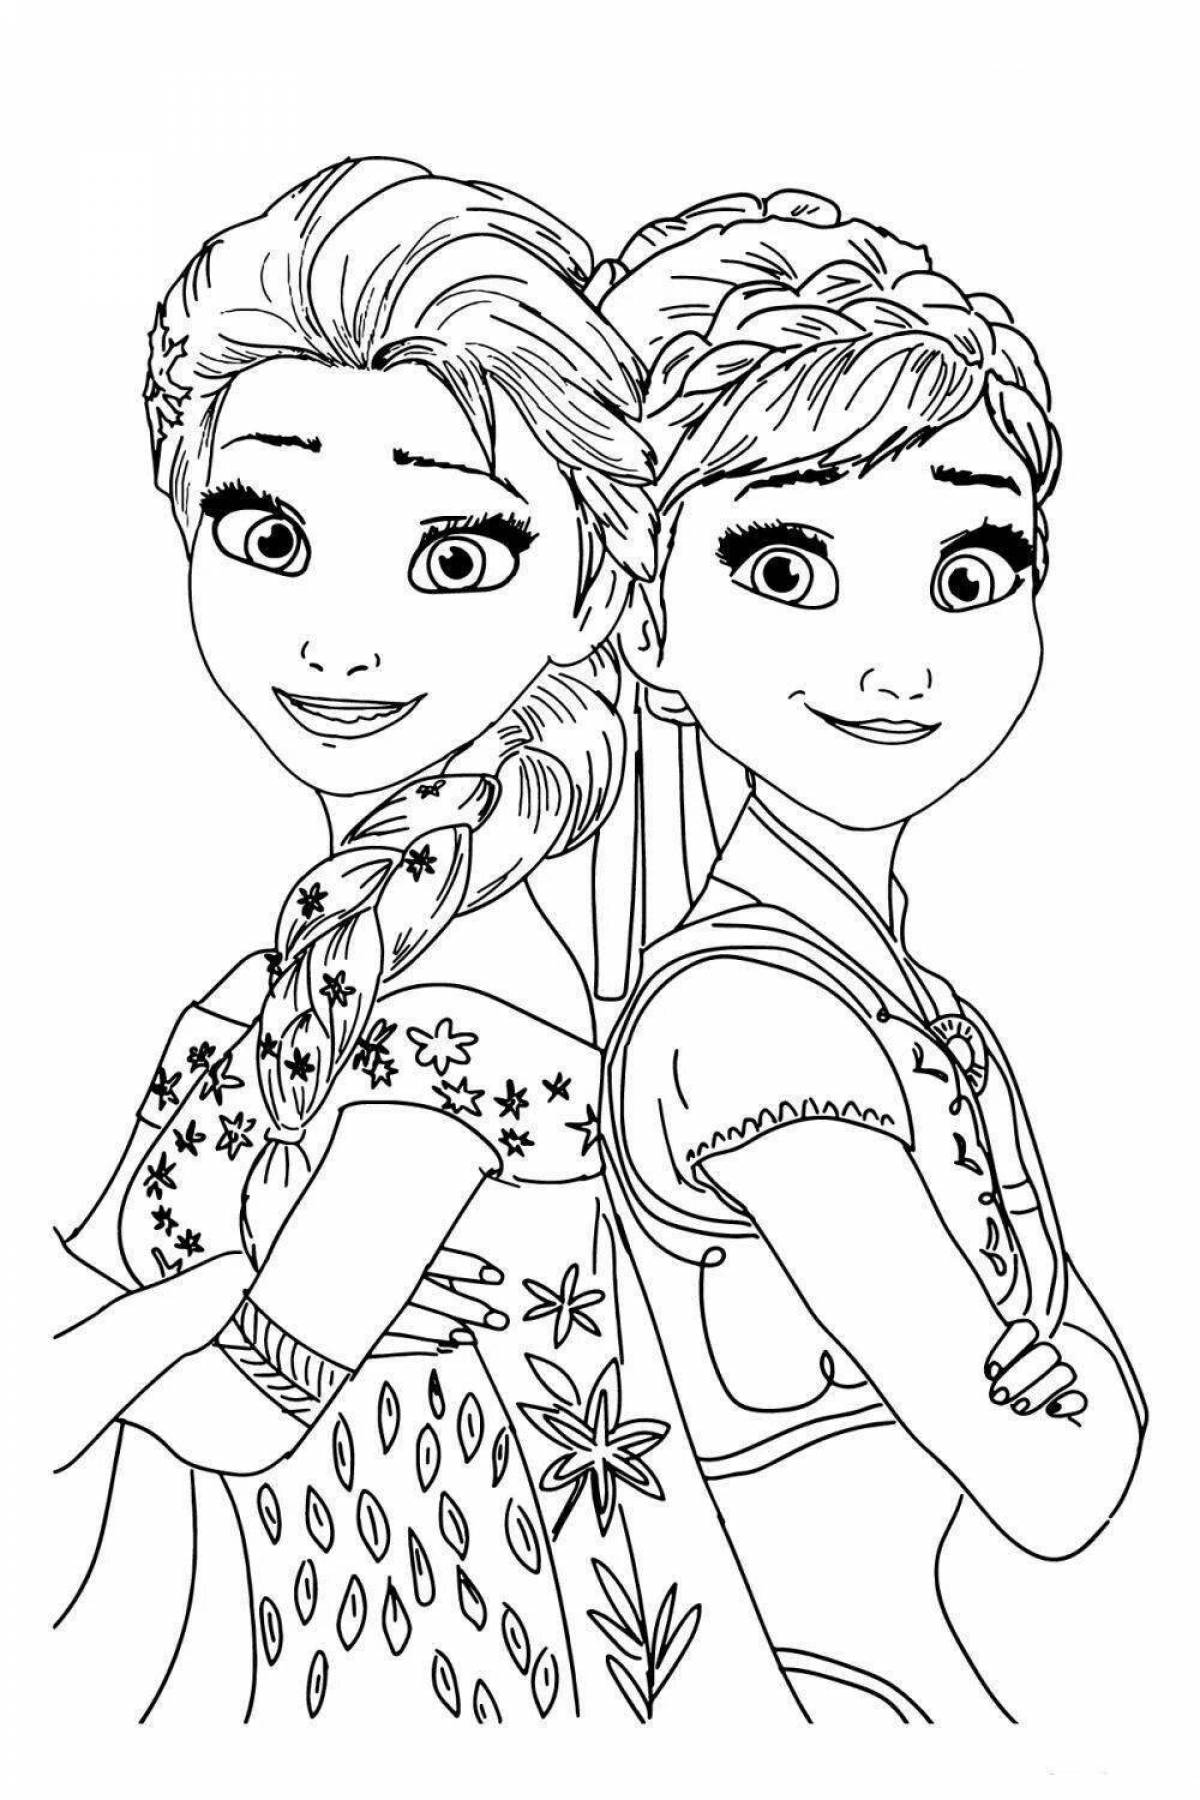 Frozen heart riot coloring page